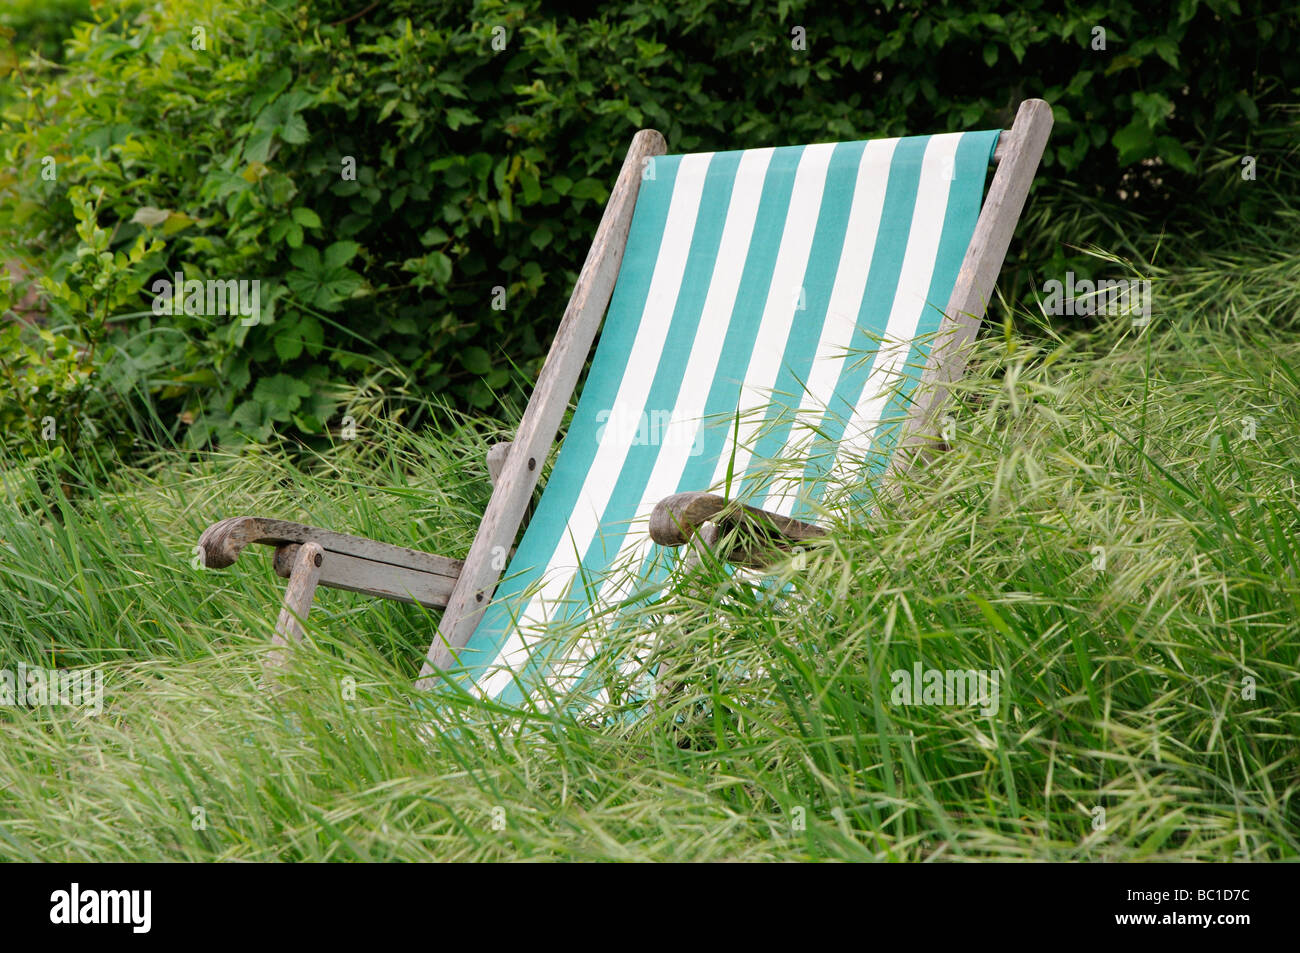 Deck chair surrounded by overgrown grass Stock Photo